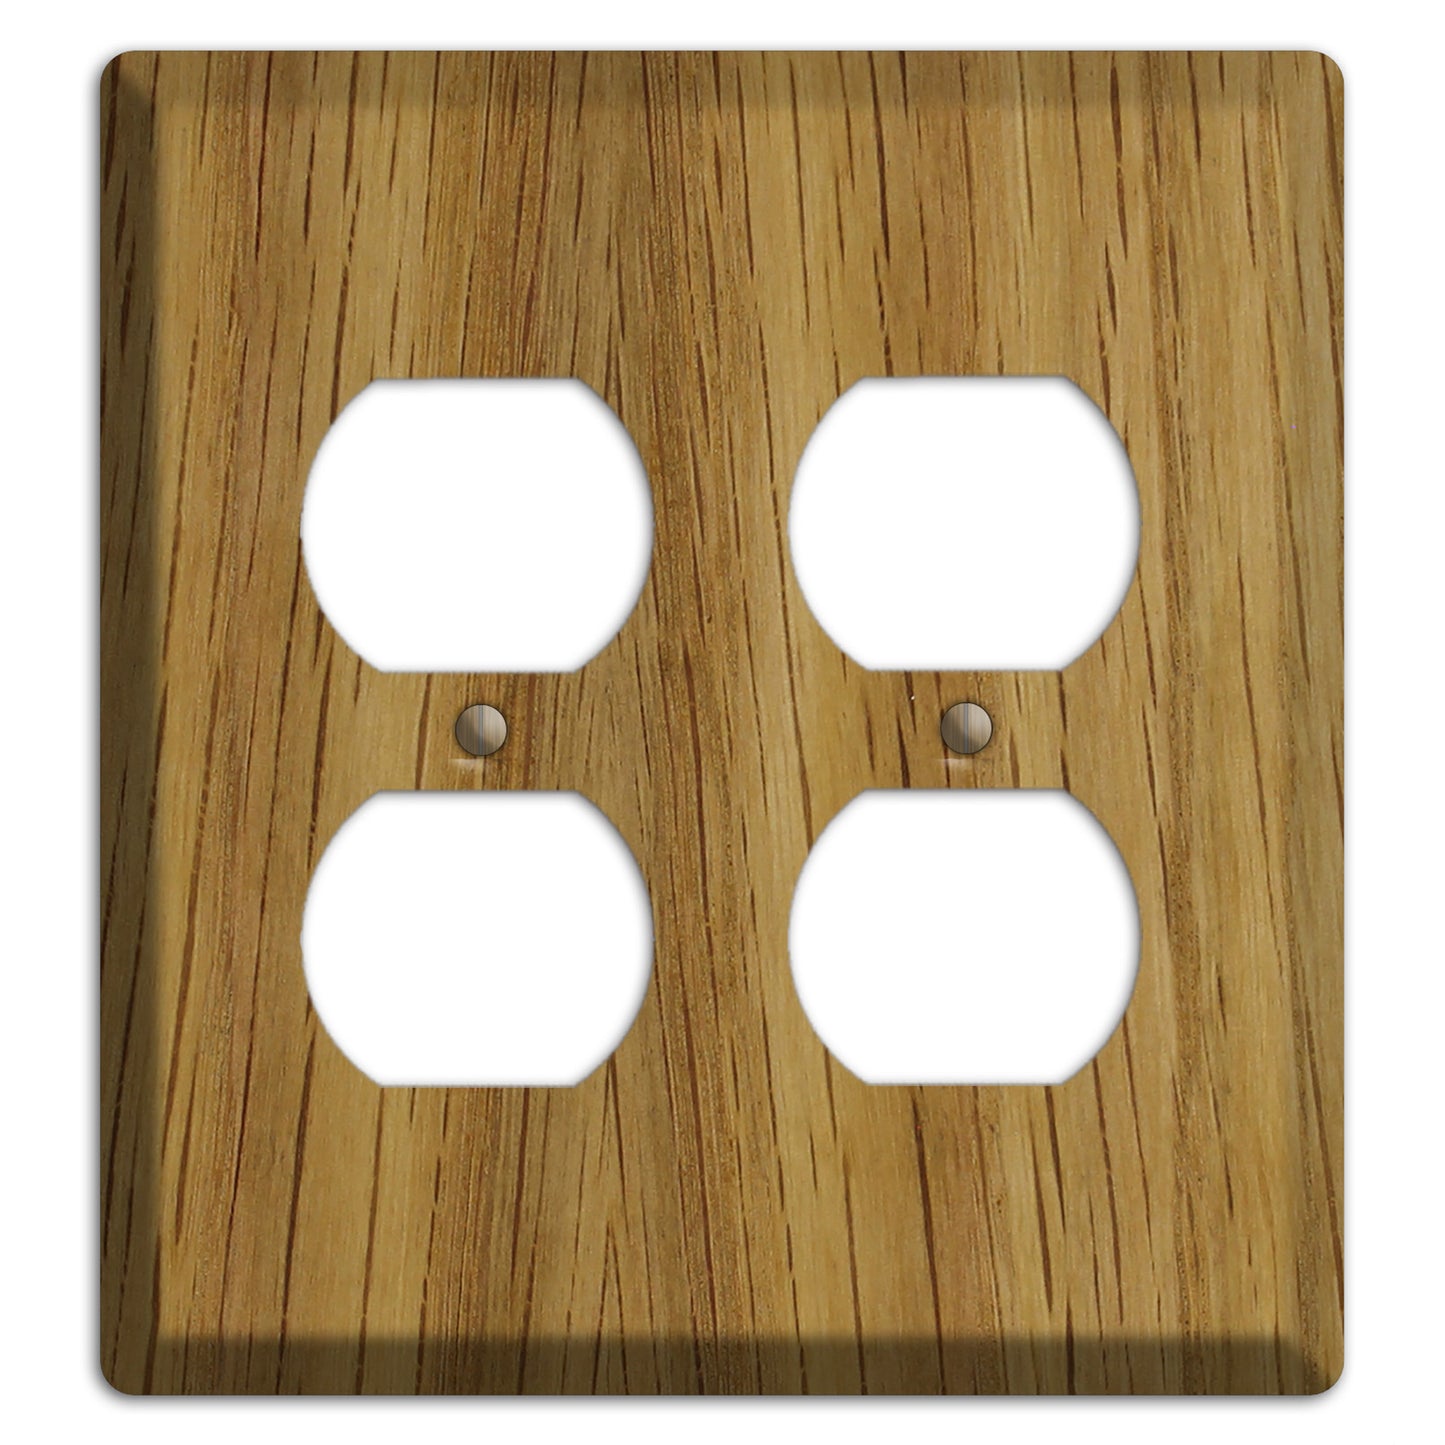 White Oak Wood 2 Duplex Outlet Cover Plate